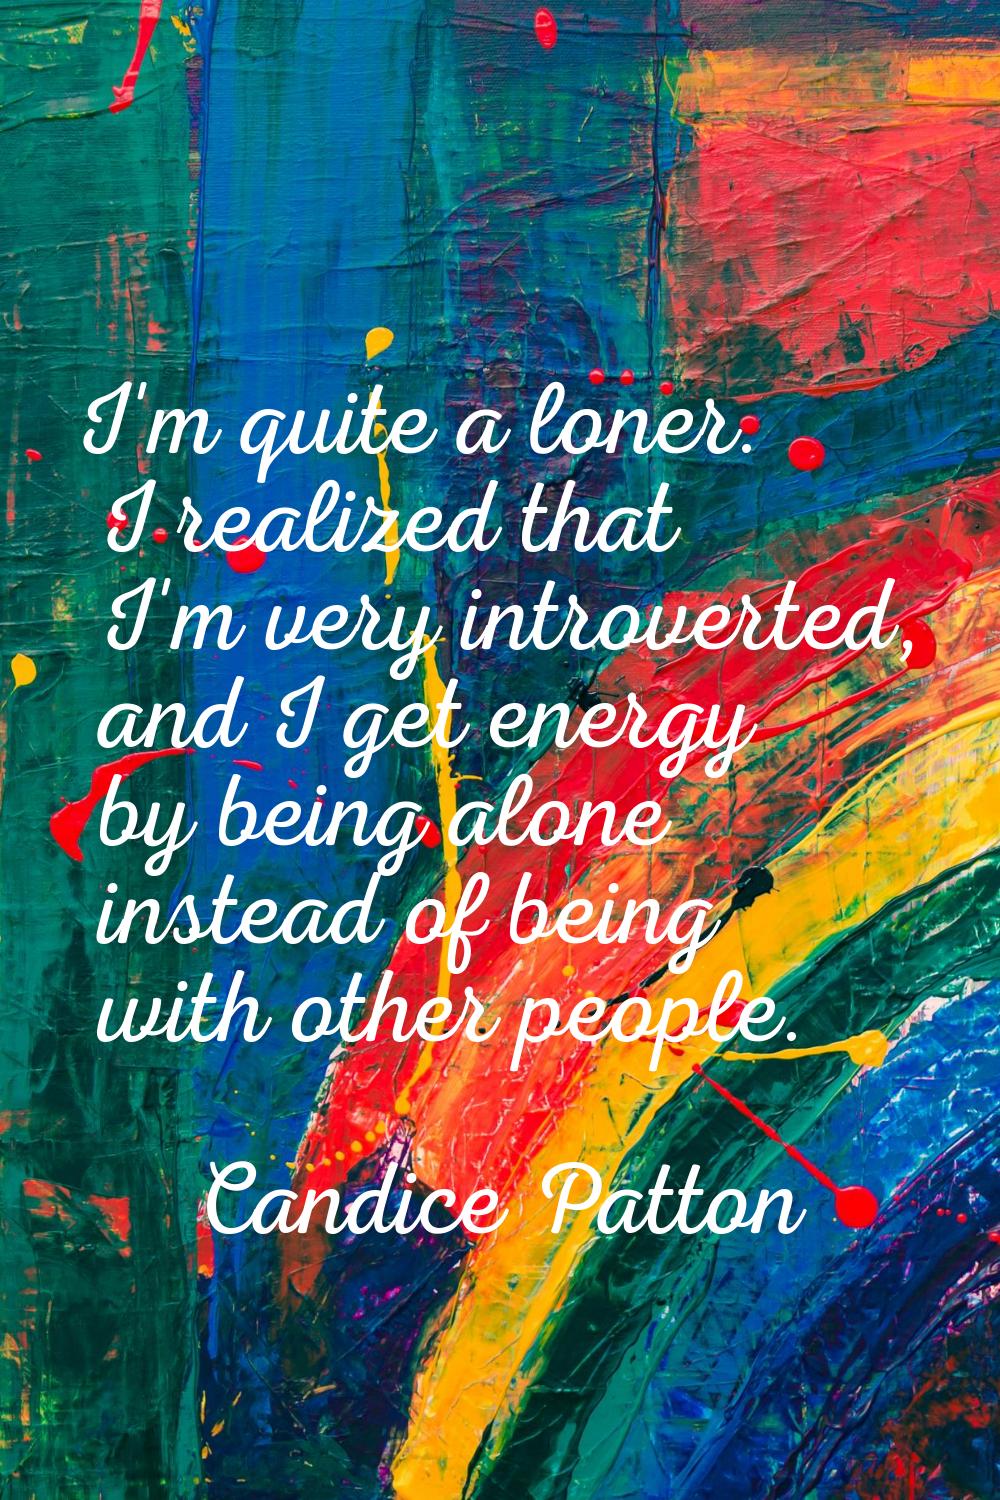 I'm quite a loner. I realized that I'm very introverted, and I get energy by being alone instead of